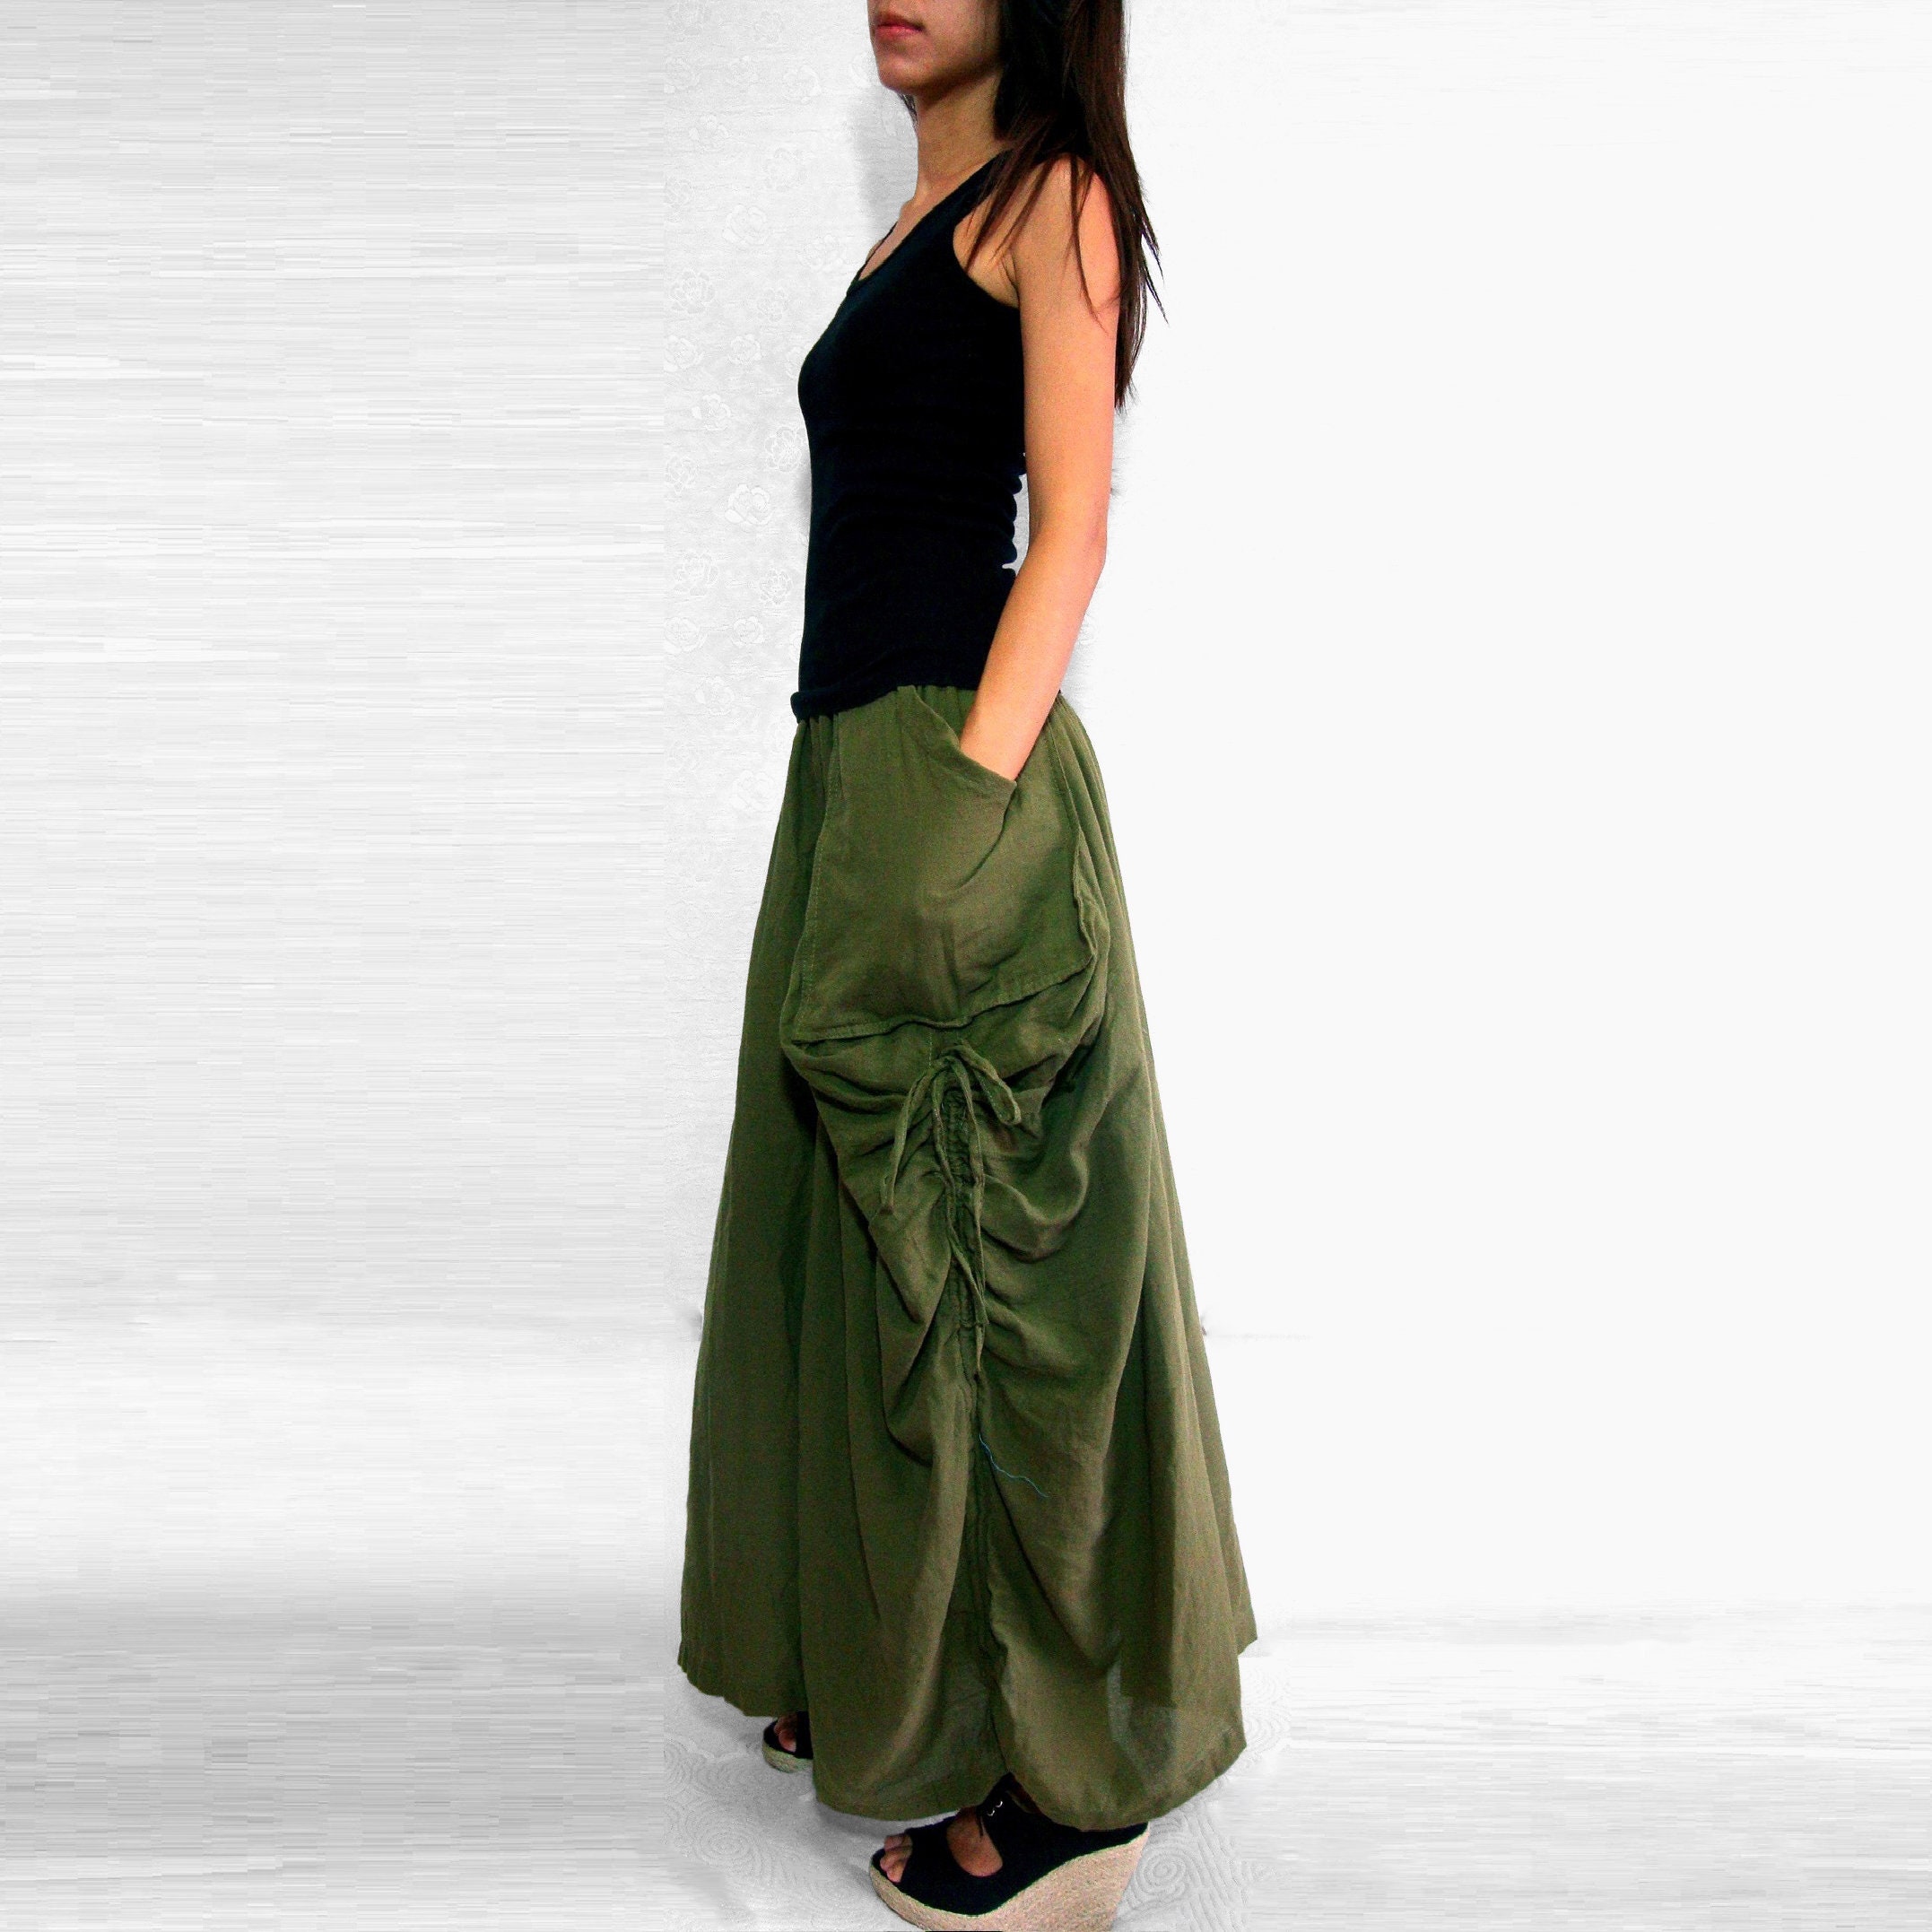 Lagenlook Maxi Skirt Big Pockets Long Skirt in Olive Army - Etsy